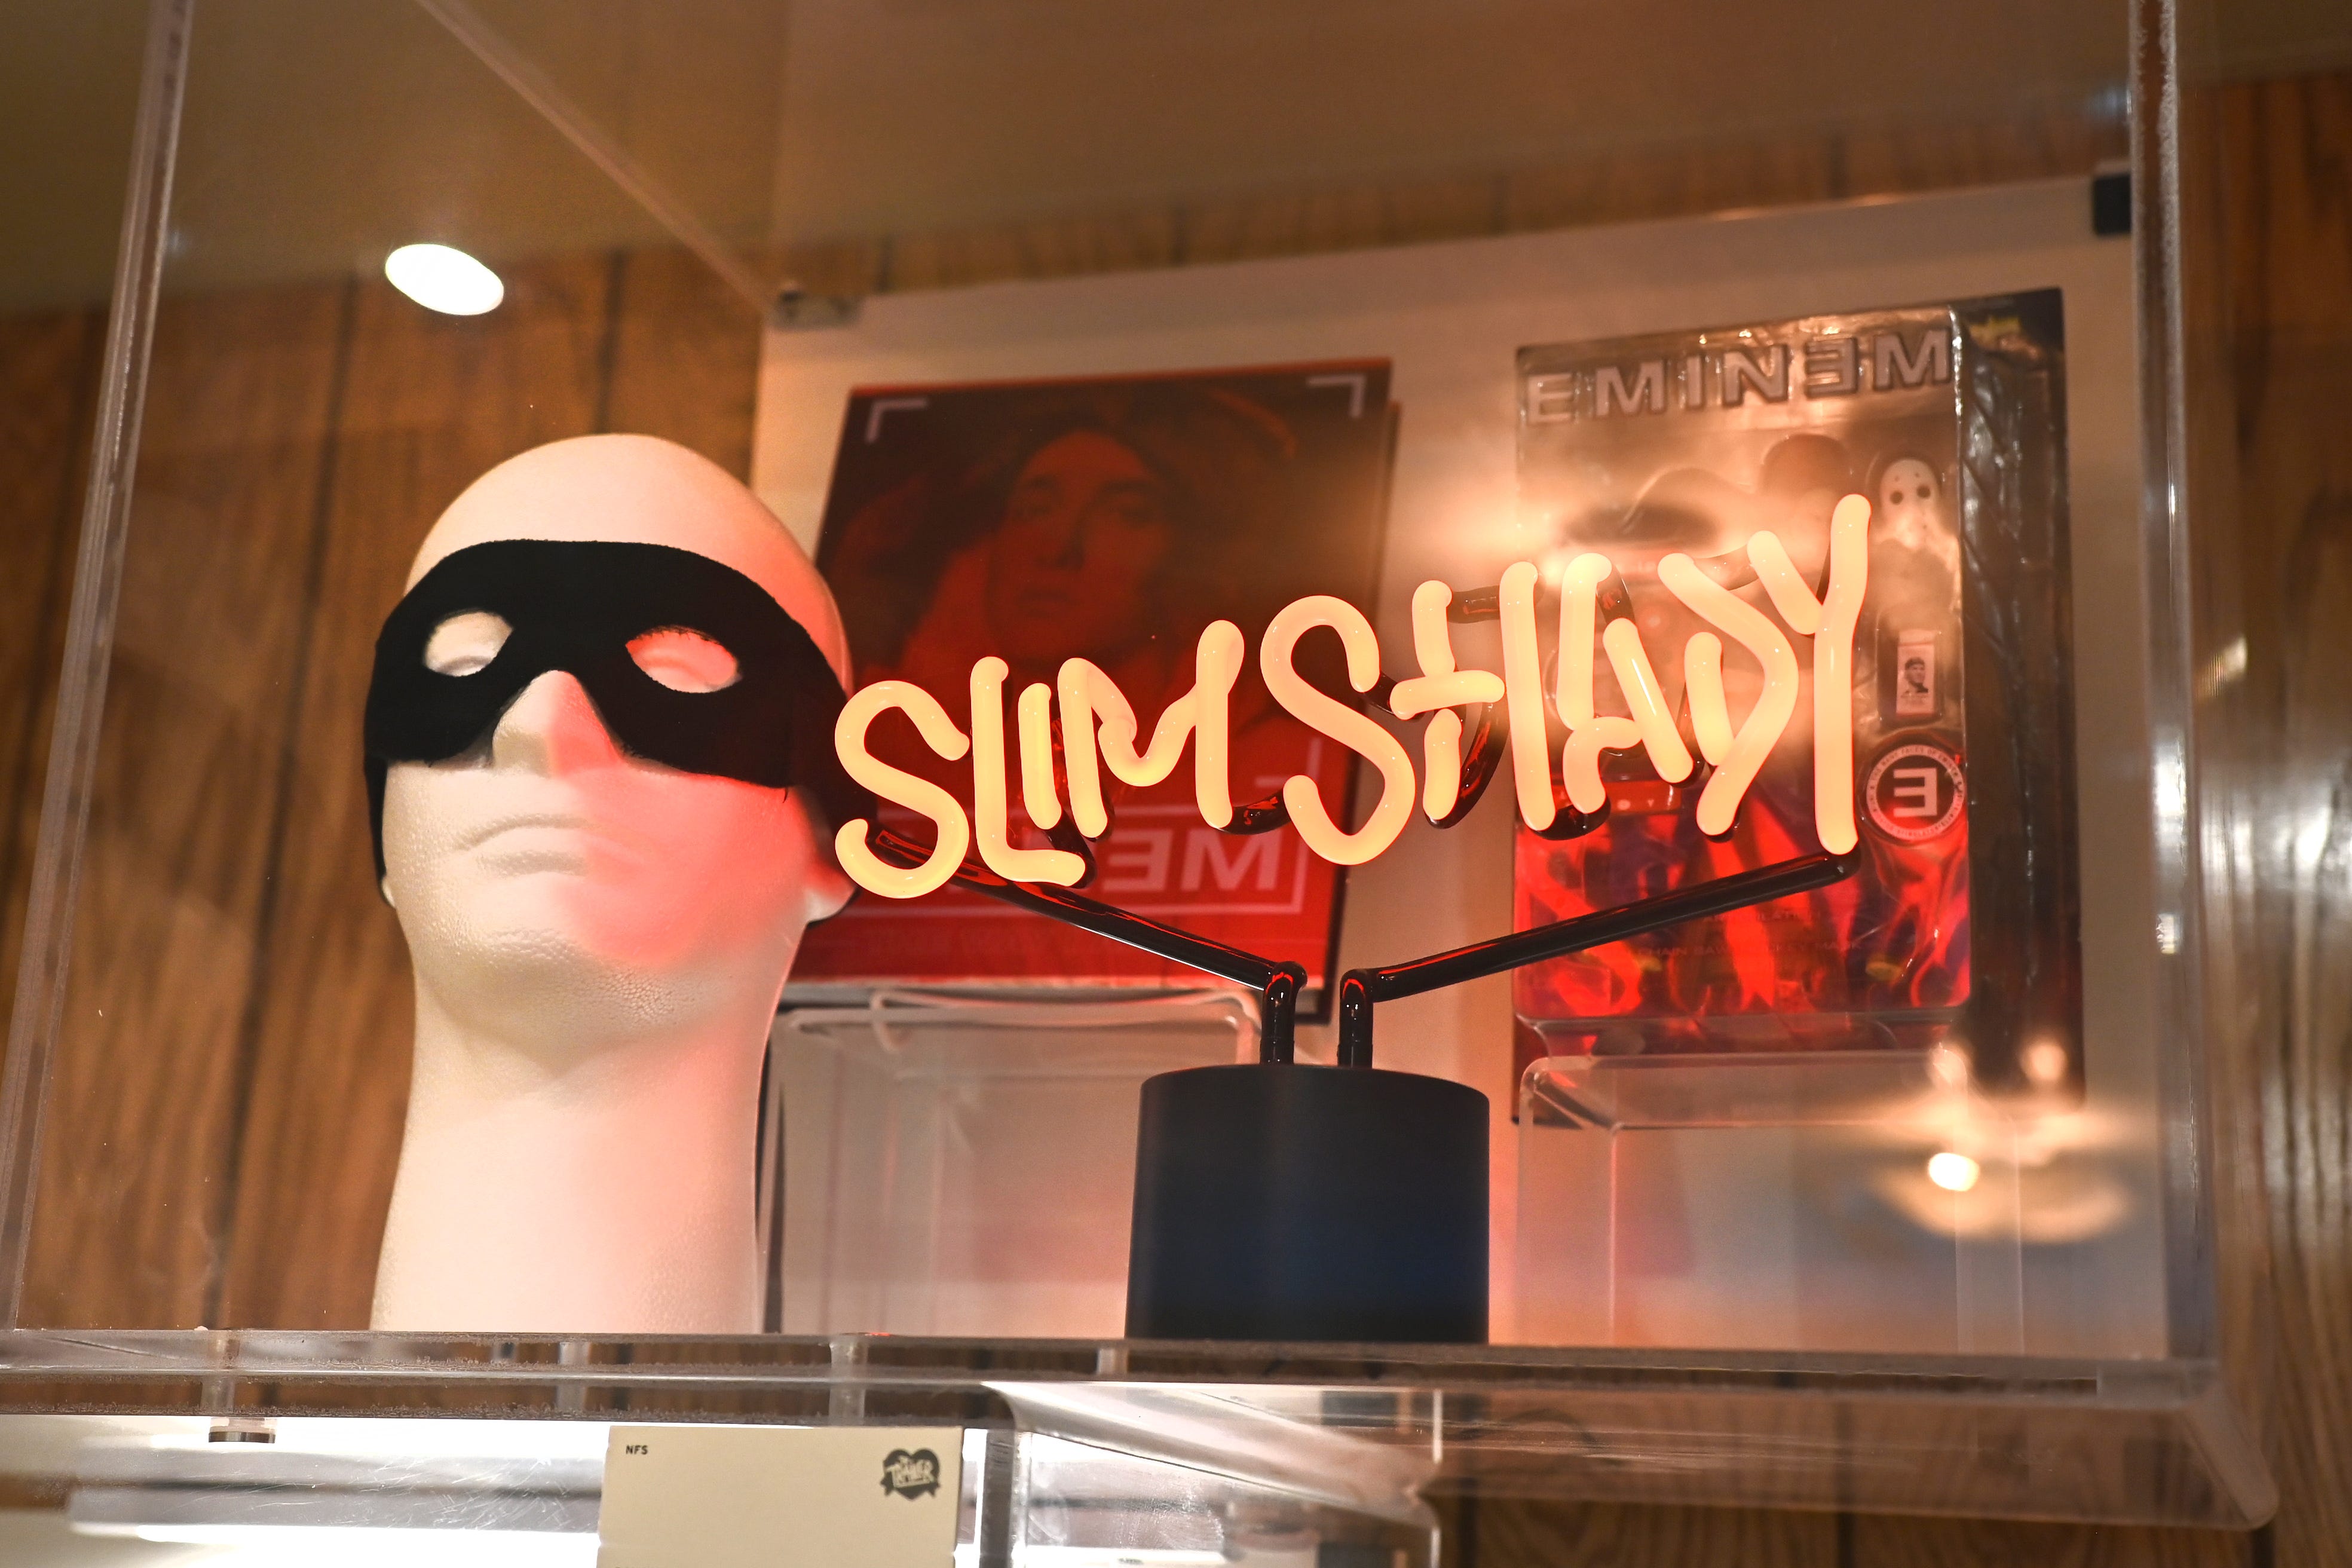 Eminem’s Robin mask and a Slim Shady neon sign are on display inside The Trailer Shop at Mom’s Spaghetti.